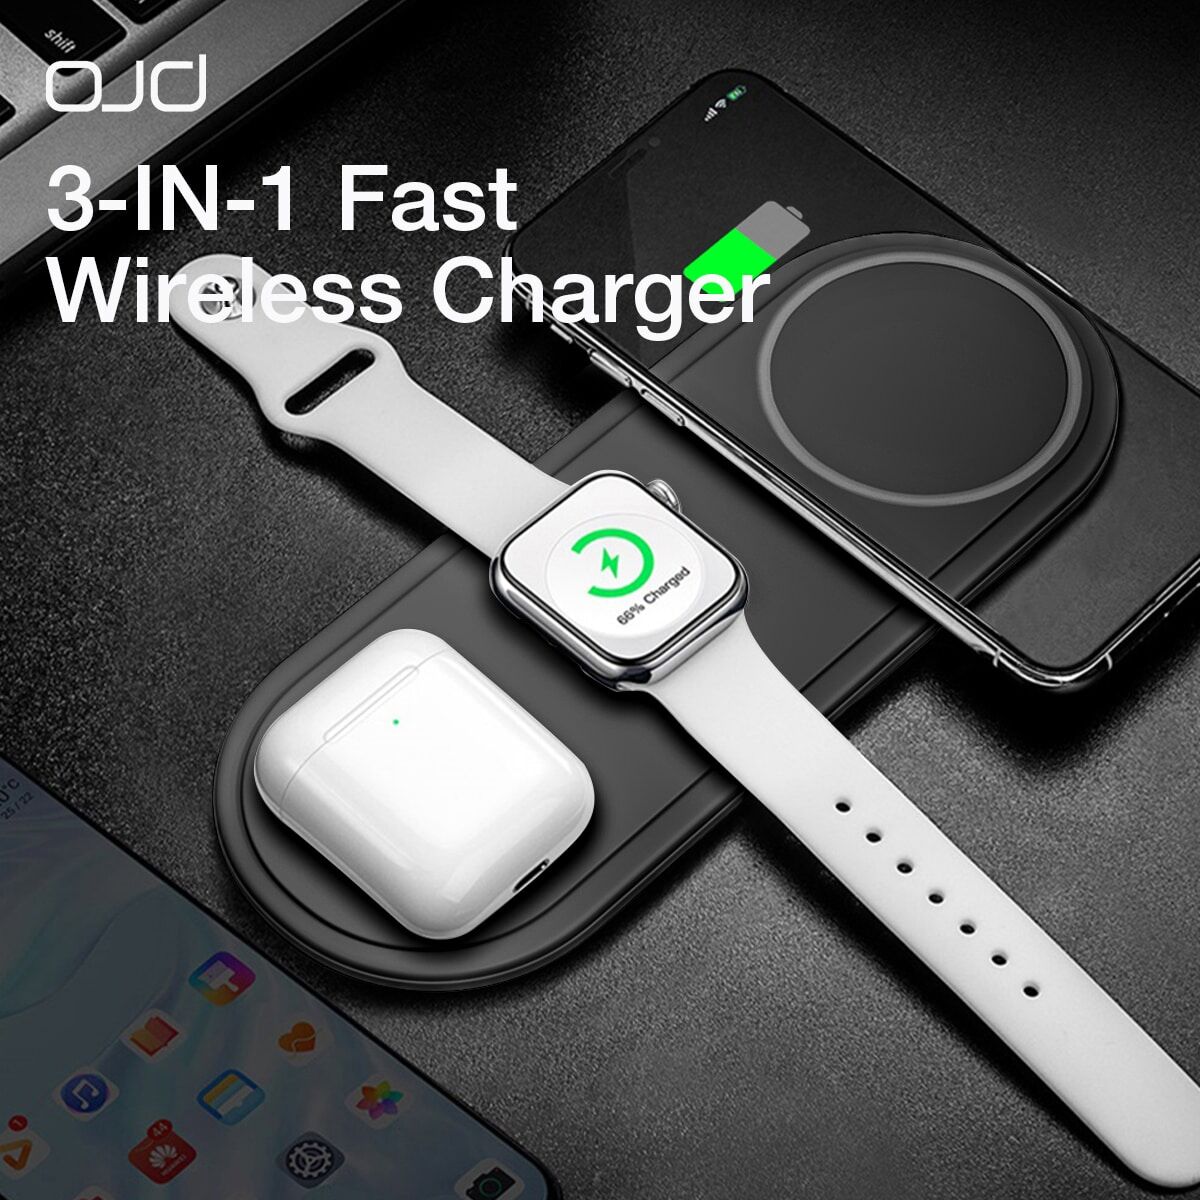 SHEIN OJD 3 in 1 Wireless Charging Station, 15W Fast Charger for iPhone 14 Pro Max/14 Pro/14 Plus/13/12/11/X, Apple Watch Ultra/SE/8/7/6/5/4/3/2, AirPods Pro/3, and Other Wireless Charging-enabled Devices.(Included A Type-C Cable) Black one-size,Includes 